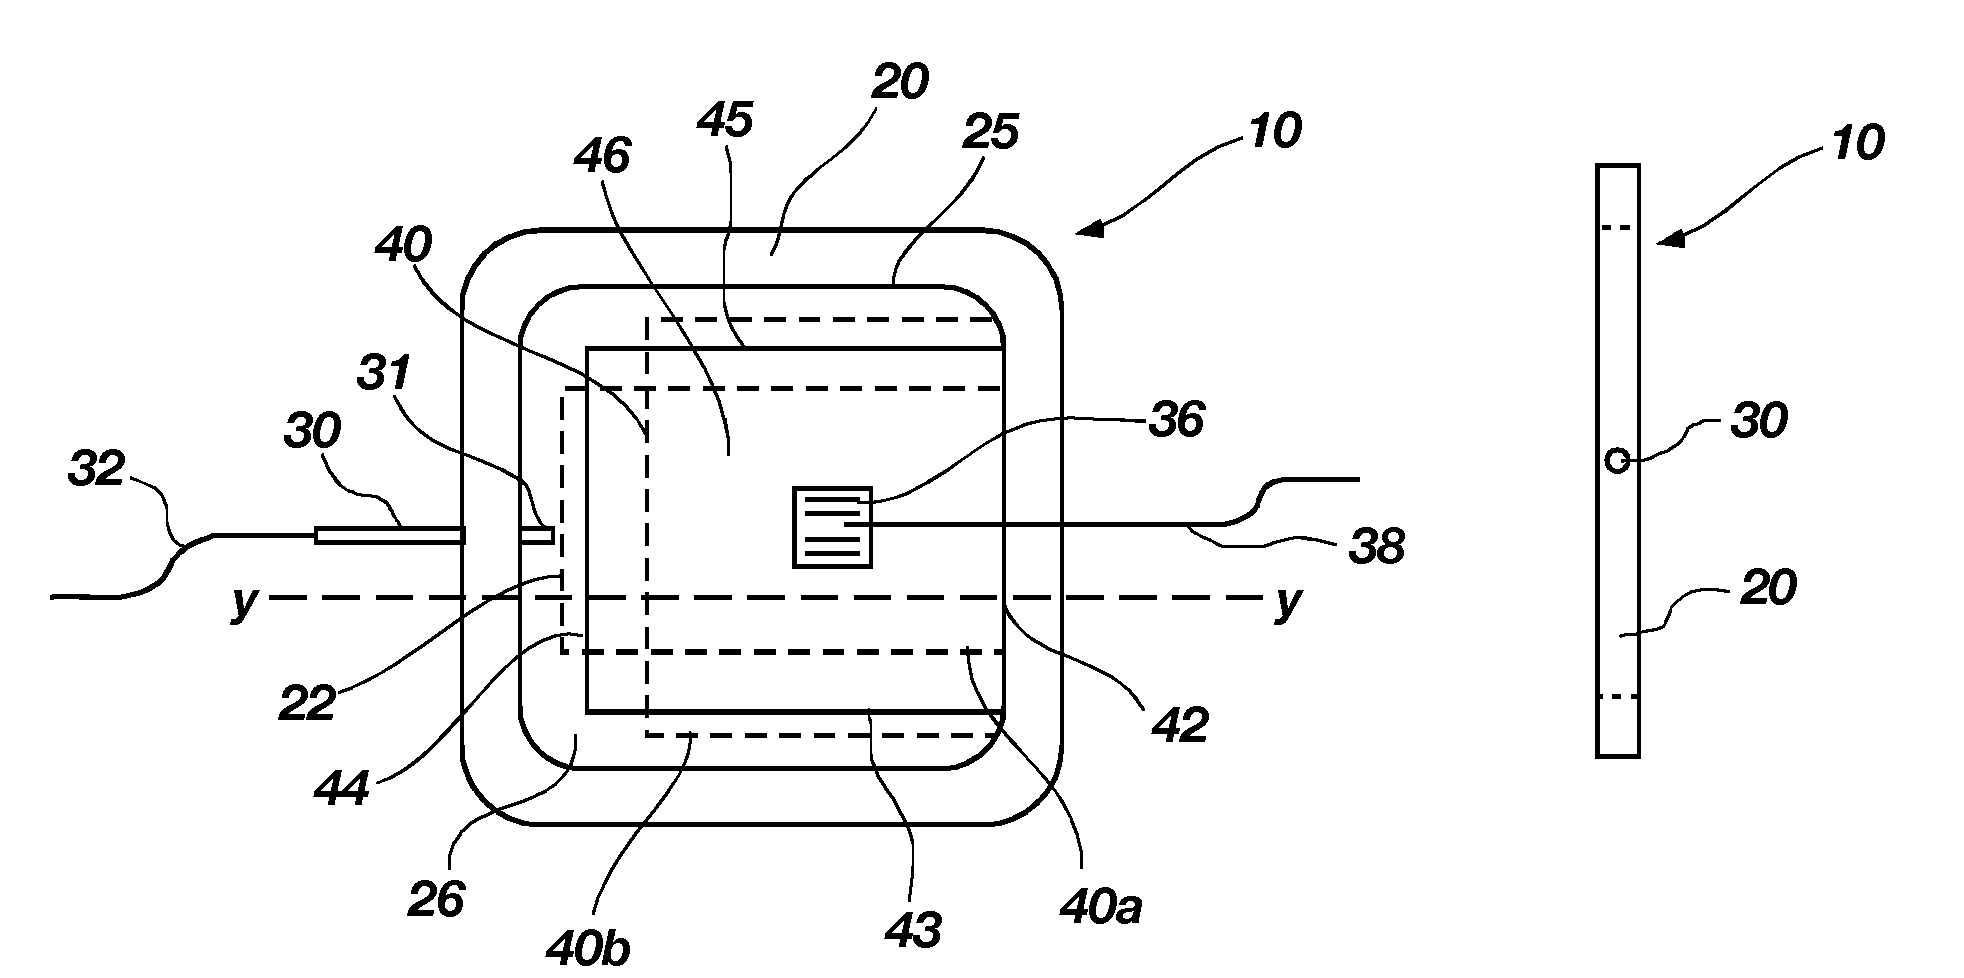 Relaxation modulus sensor, structure incorporating same, and method for use of same